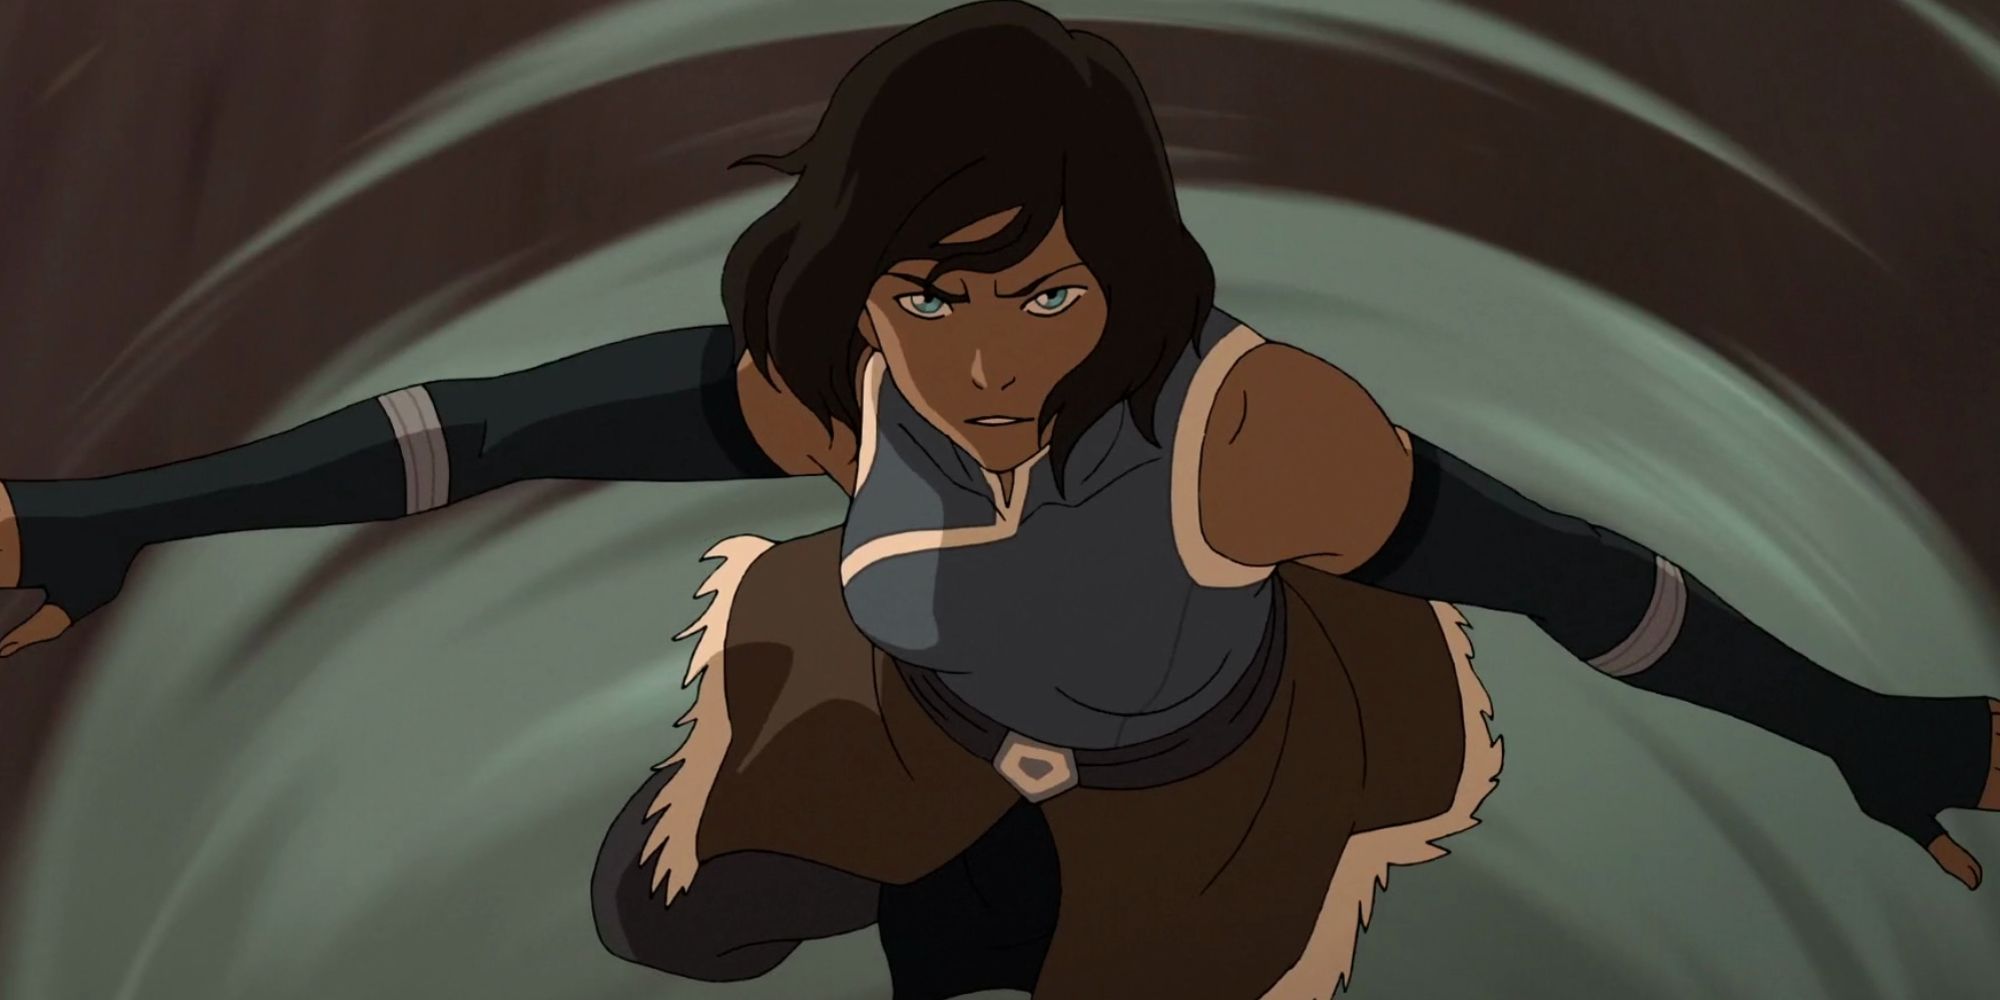 Korra performing a spinning attack that swirls the air around her